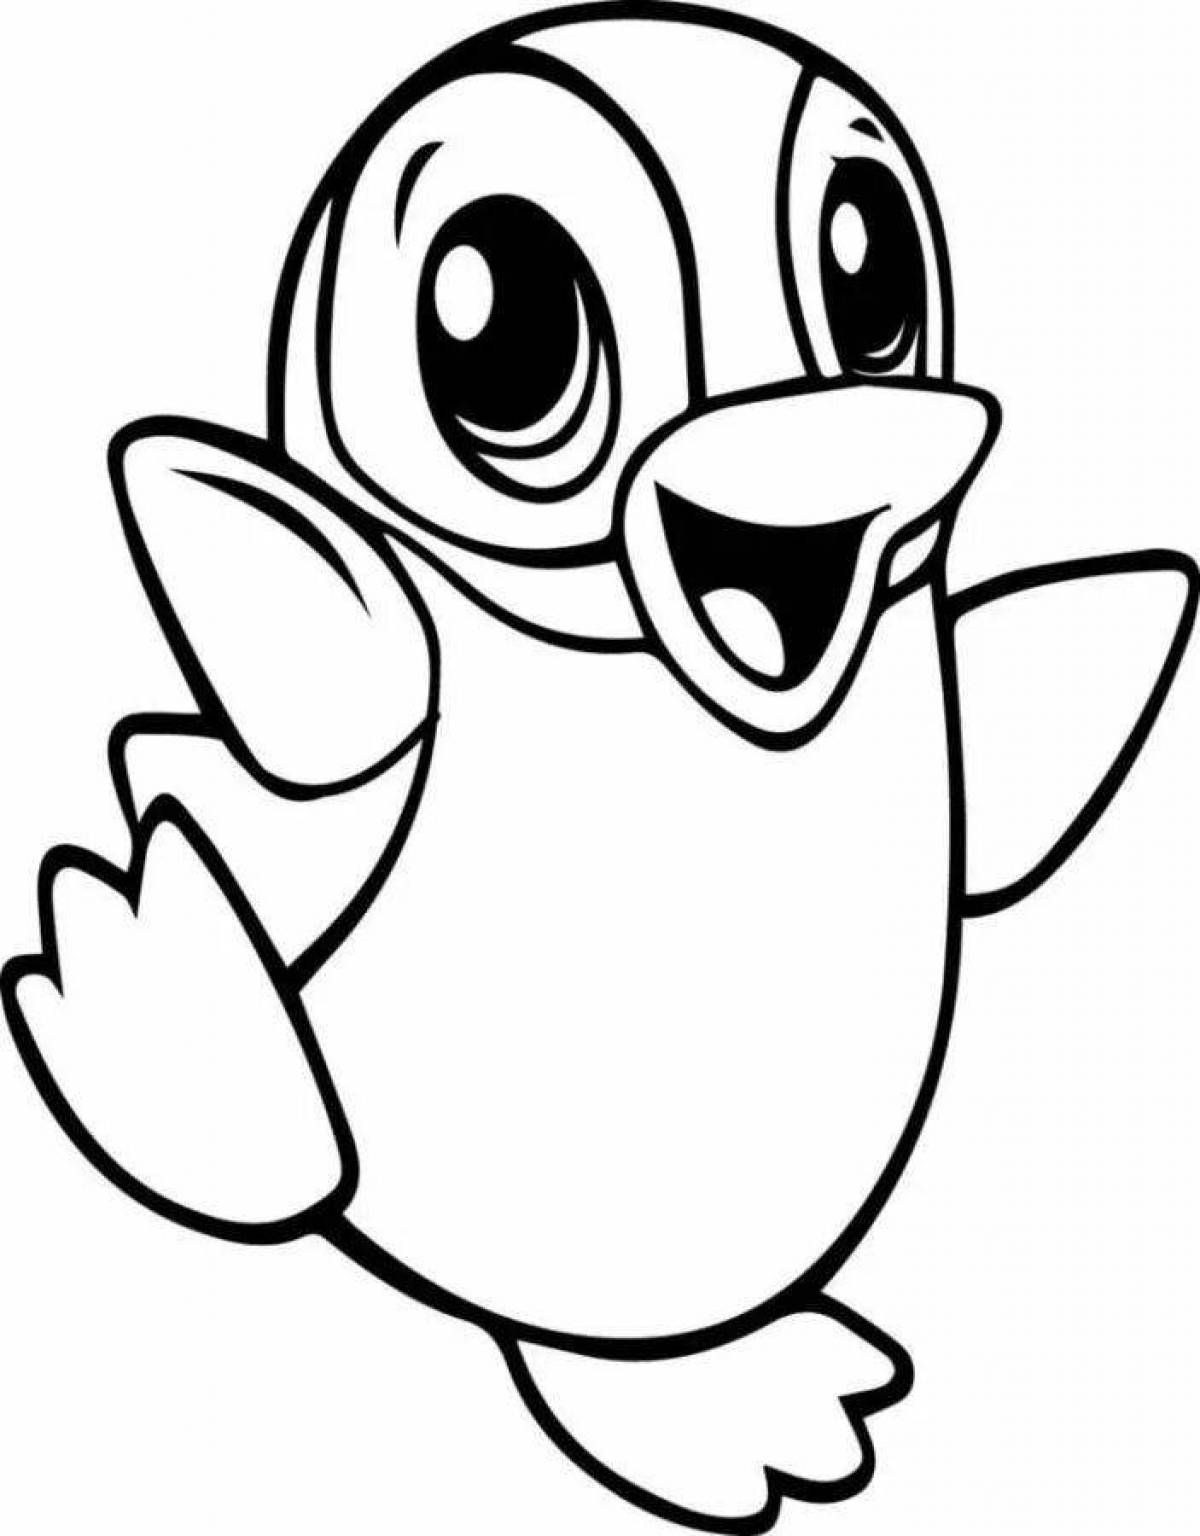 Cute and happy penguin coloring book